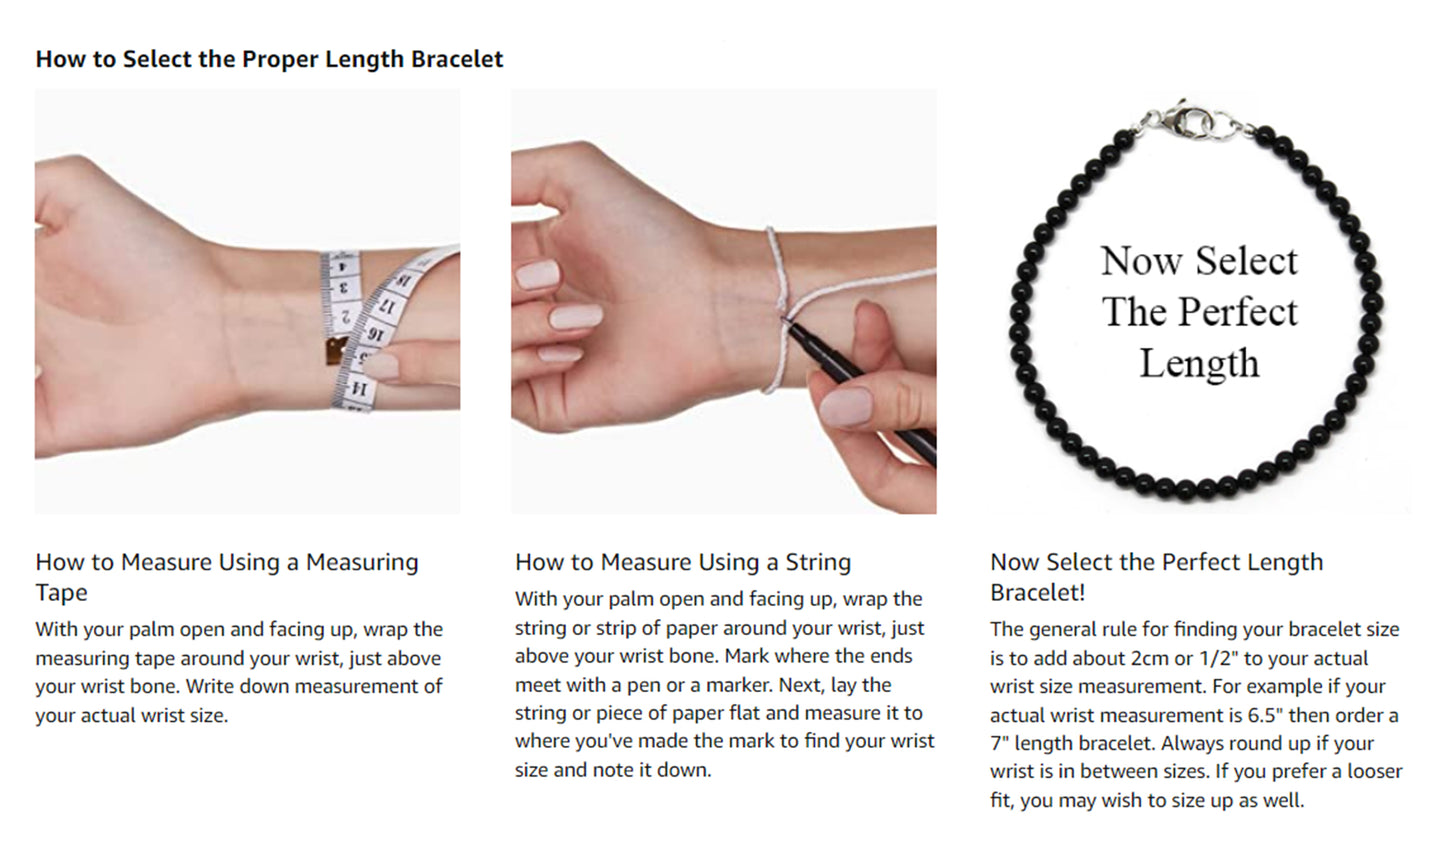 How to measure your wrist to find your perfect bracelet size